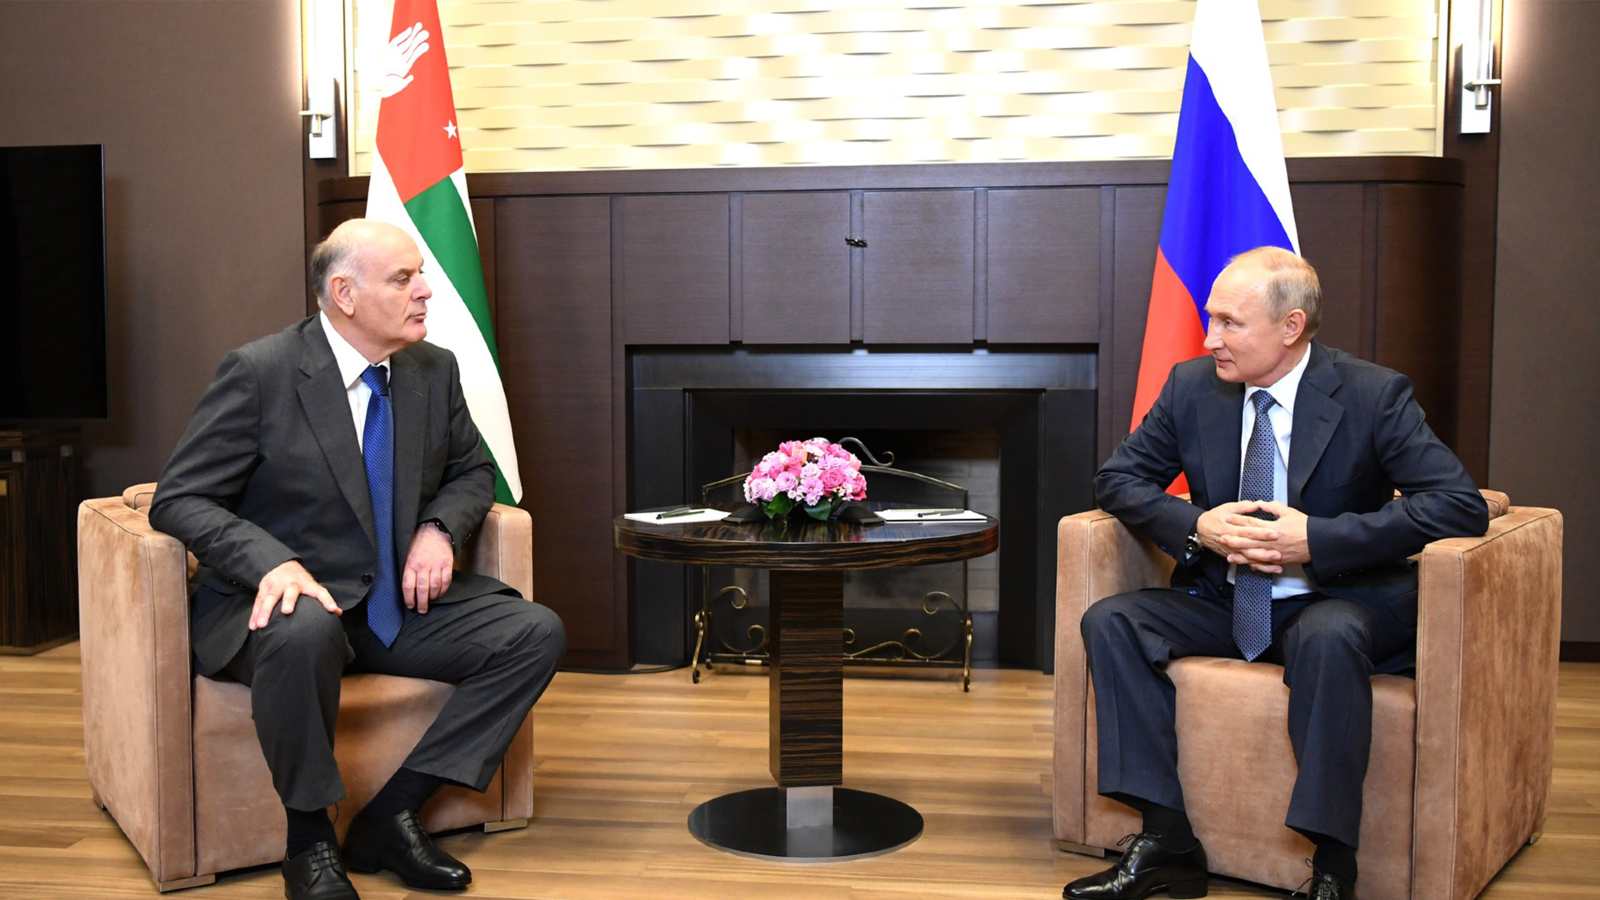 Photo: In Sochi, Vladimir Putin held talks with President of the Republic of Abkhazia Aslan Bzhania, who arrived in Russia on a working visit. November 12, 2020. Credit: Kremlin